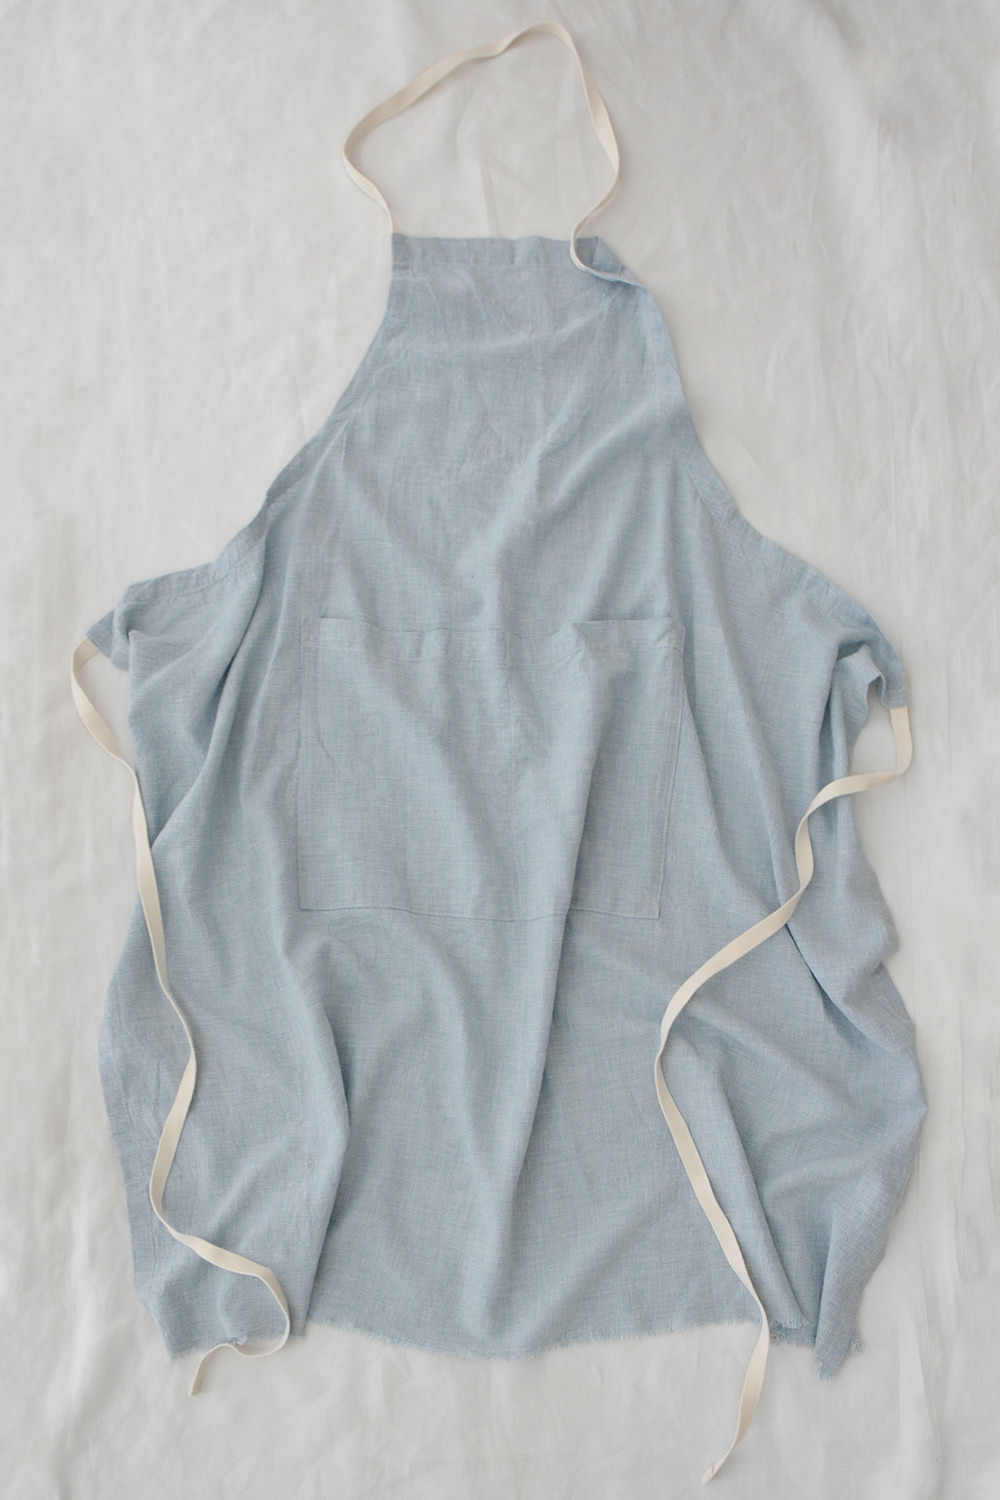 Makie Linen Cotton Apron in Blue Gingham Check. Main